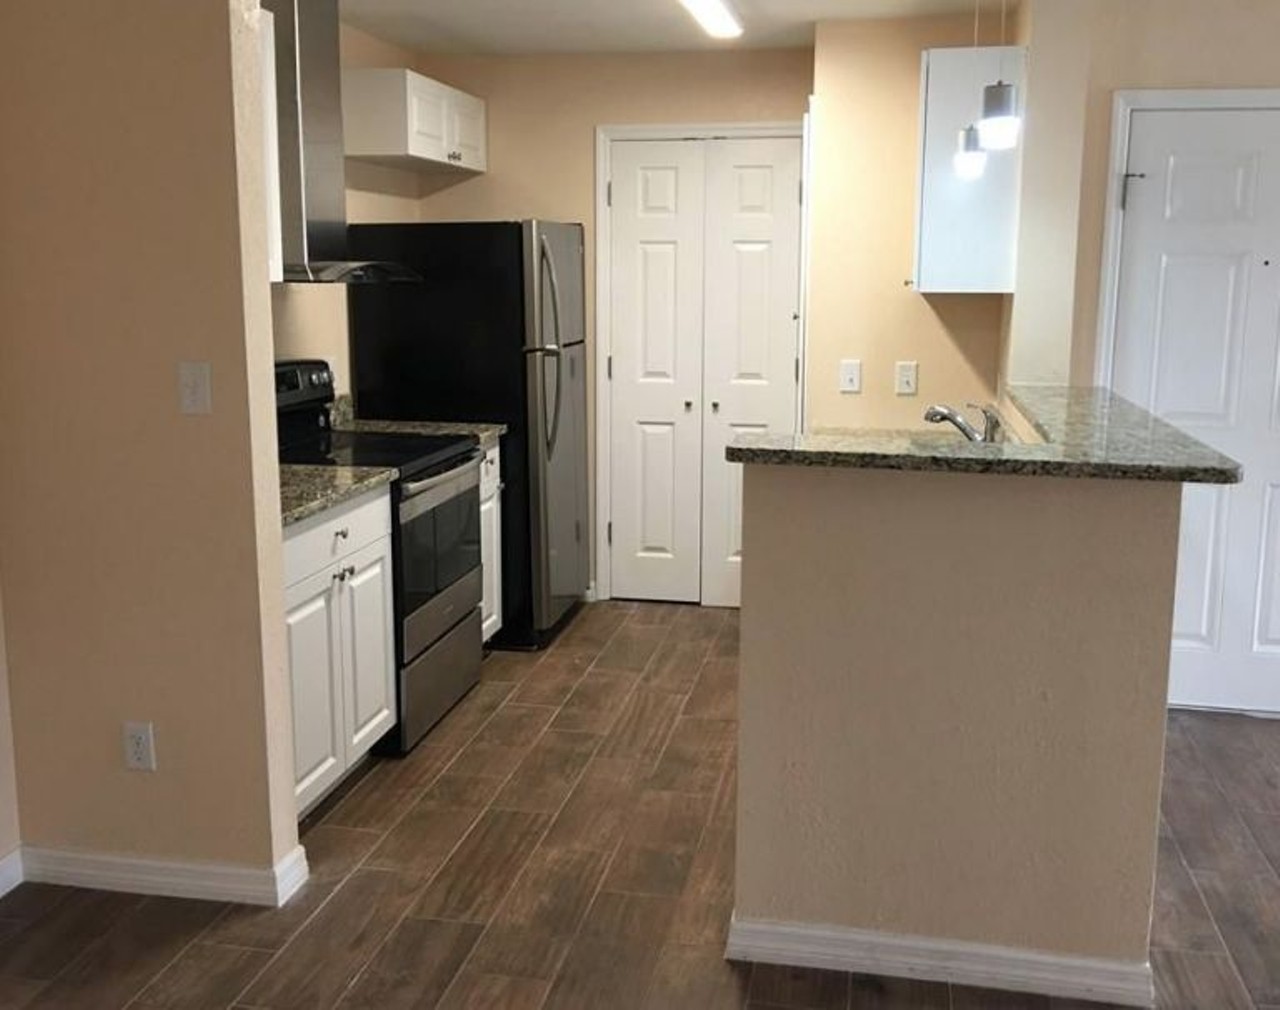 5600 Devonbriar Way, Orlando
$1,175/mo
2 bed, 2 bath, 935 sqft
The flow of this living space blends the lines from the kitchen into the living room. Plus look at those fresh appliances and counters.